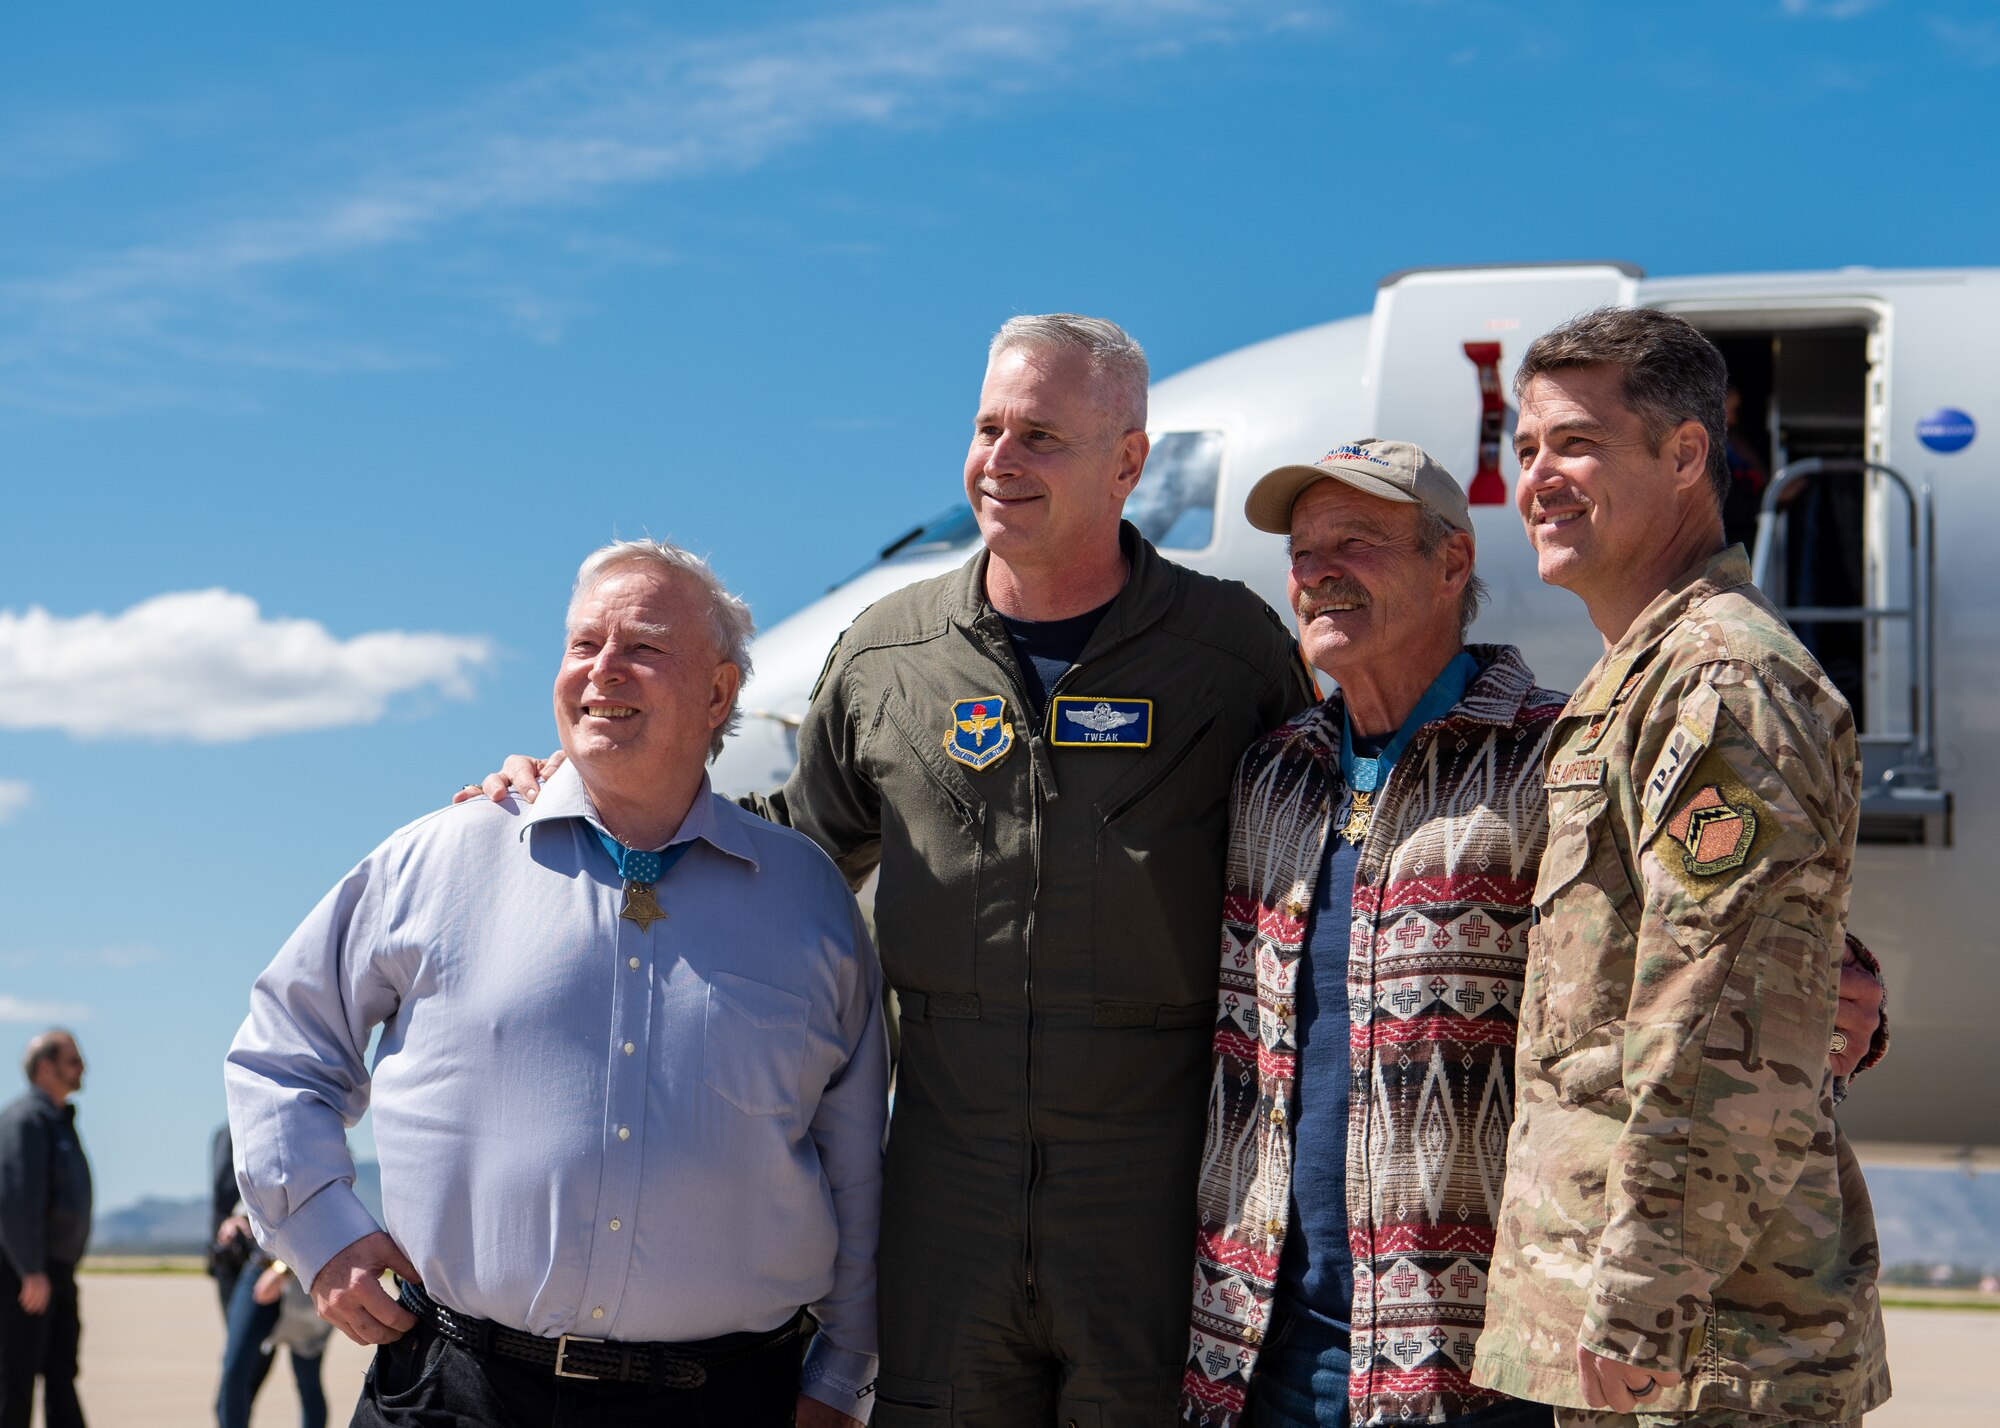 Medal of Honor recipients Donald Ballard and John Baca pose for a photo with Col. Michael Richardson, 56th Fighter Wing vice commander and Chief Master Sgt. Ronald Thompson, 56th FW command chief, March 8, 2019 at Luke Air Force Base, Ariz.